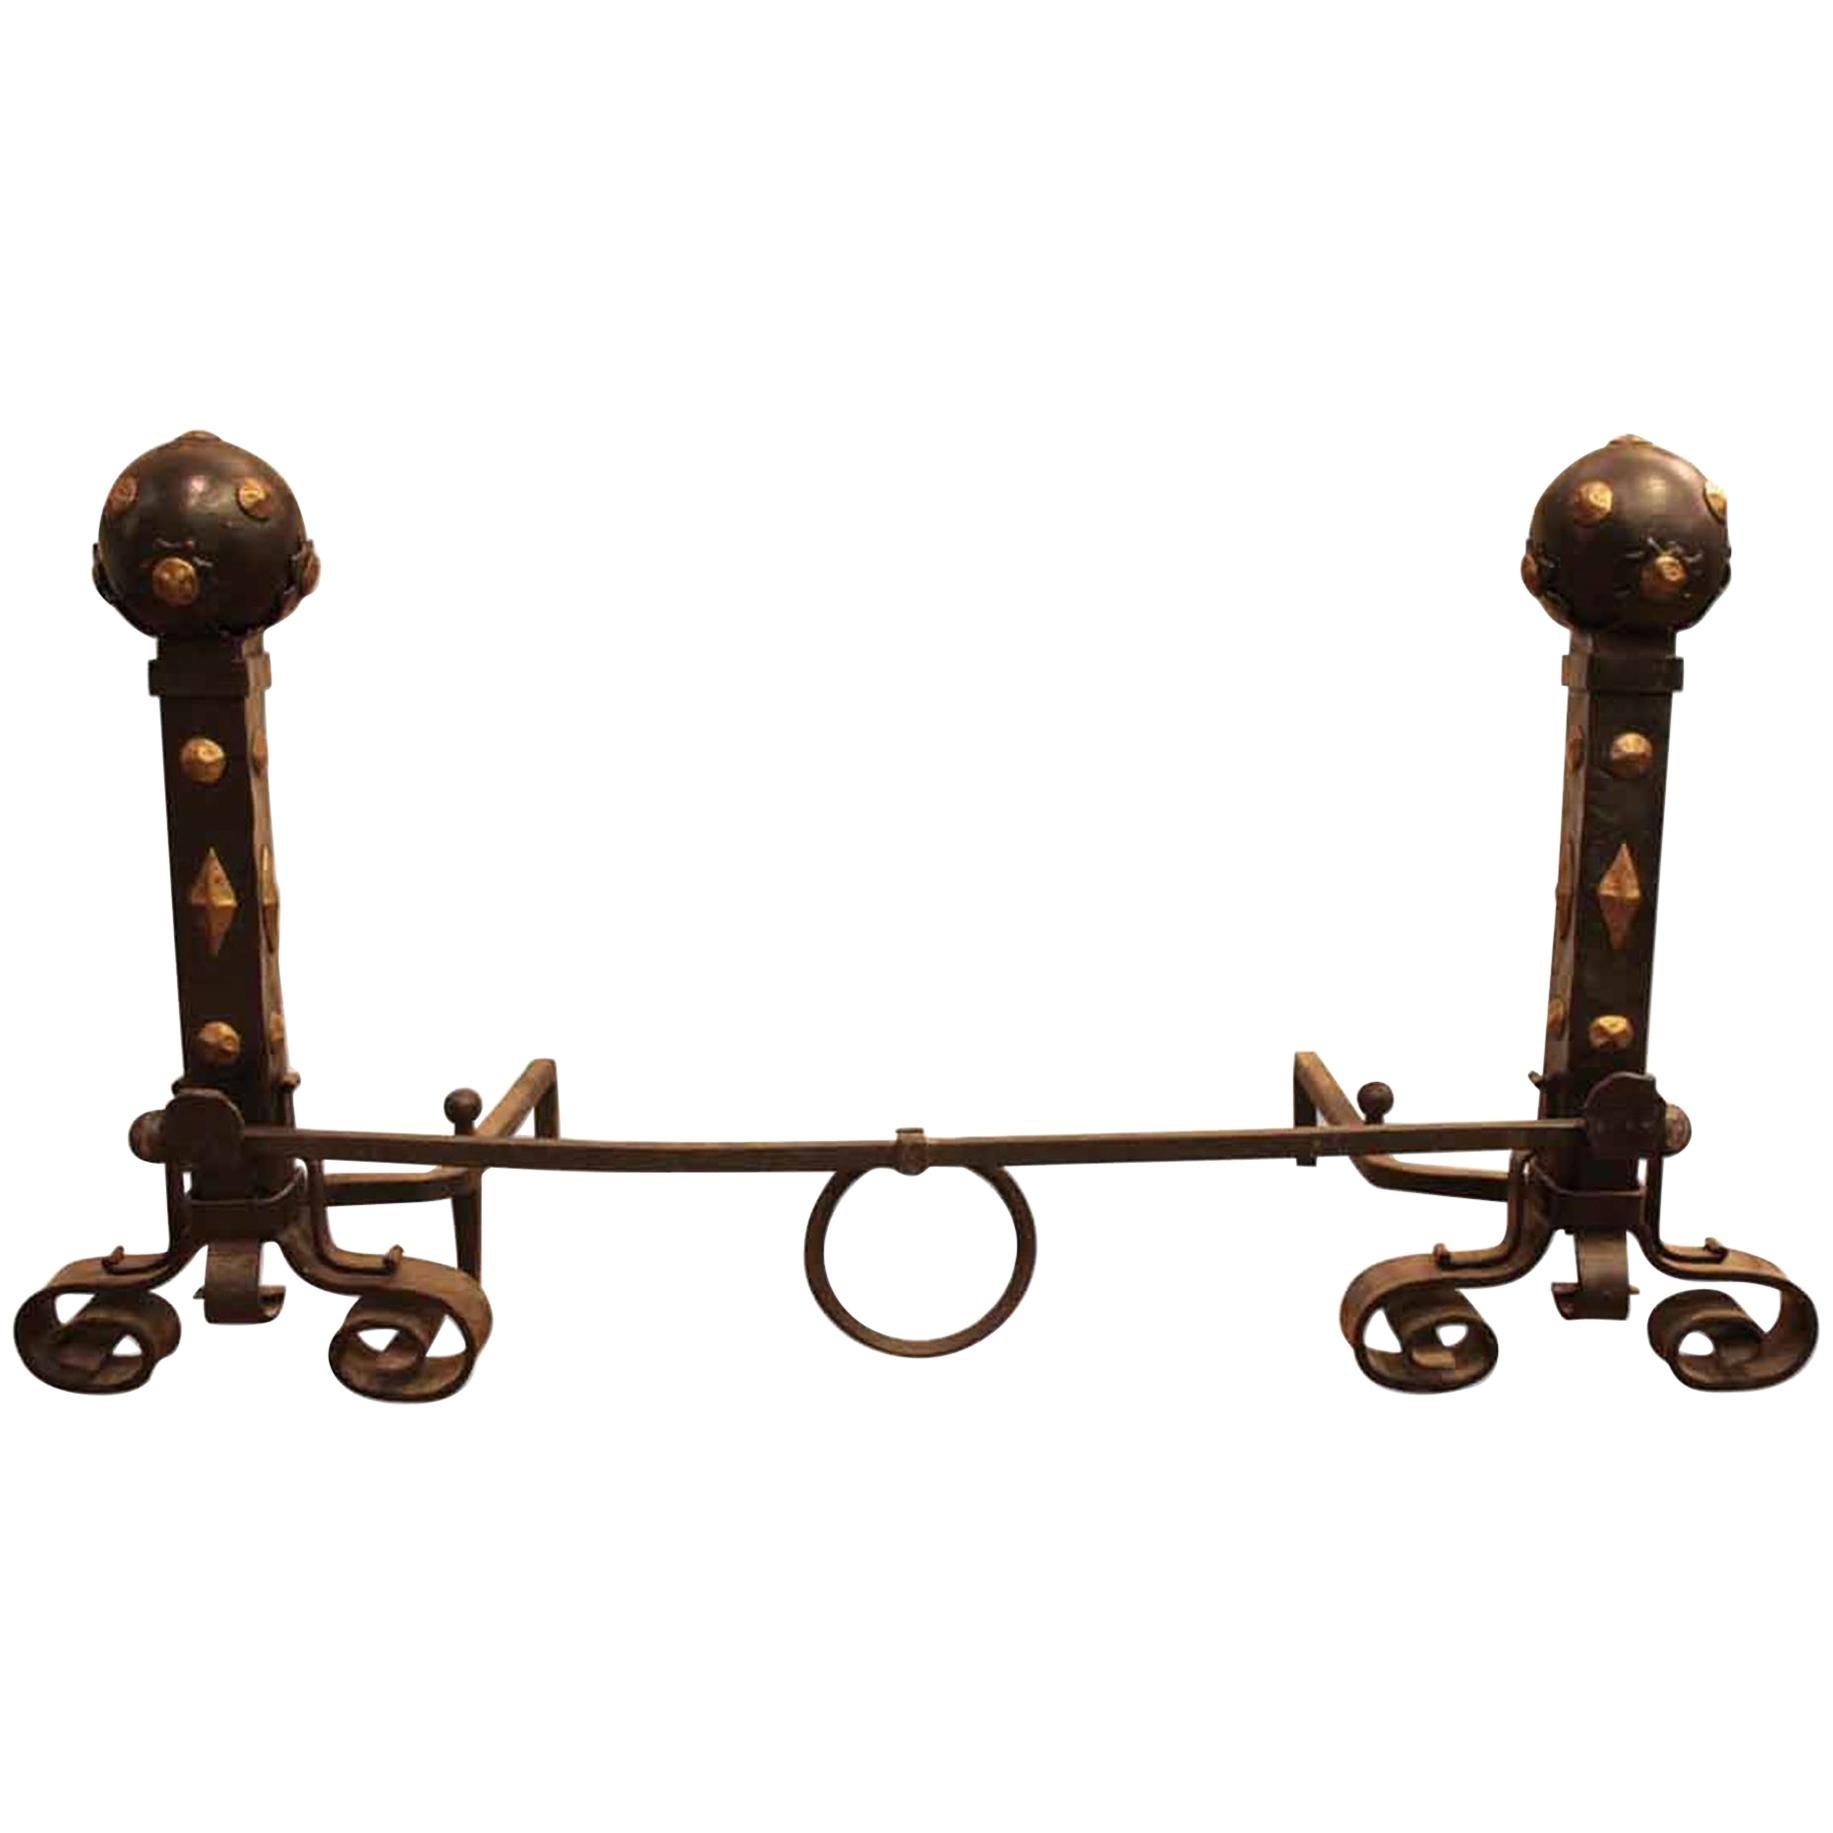 1910 Arts & Crafts Hand Brass and Wrought Iron Andirons